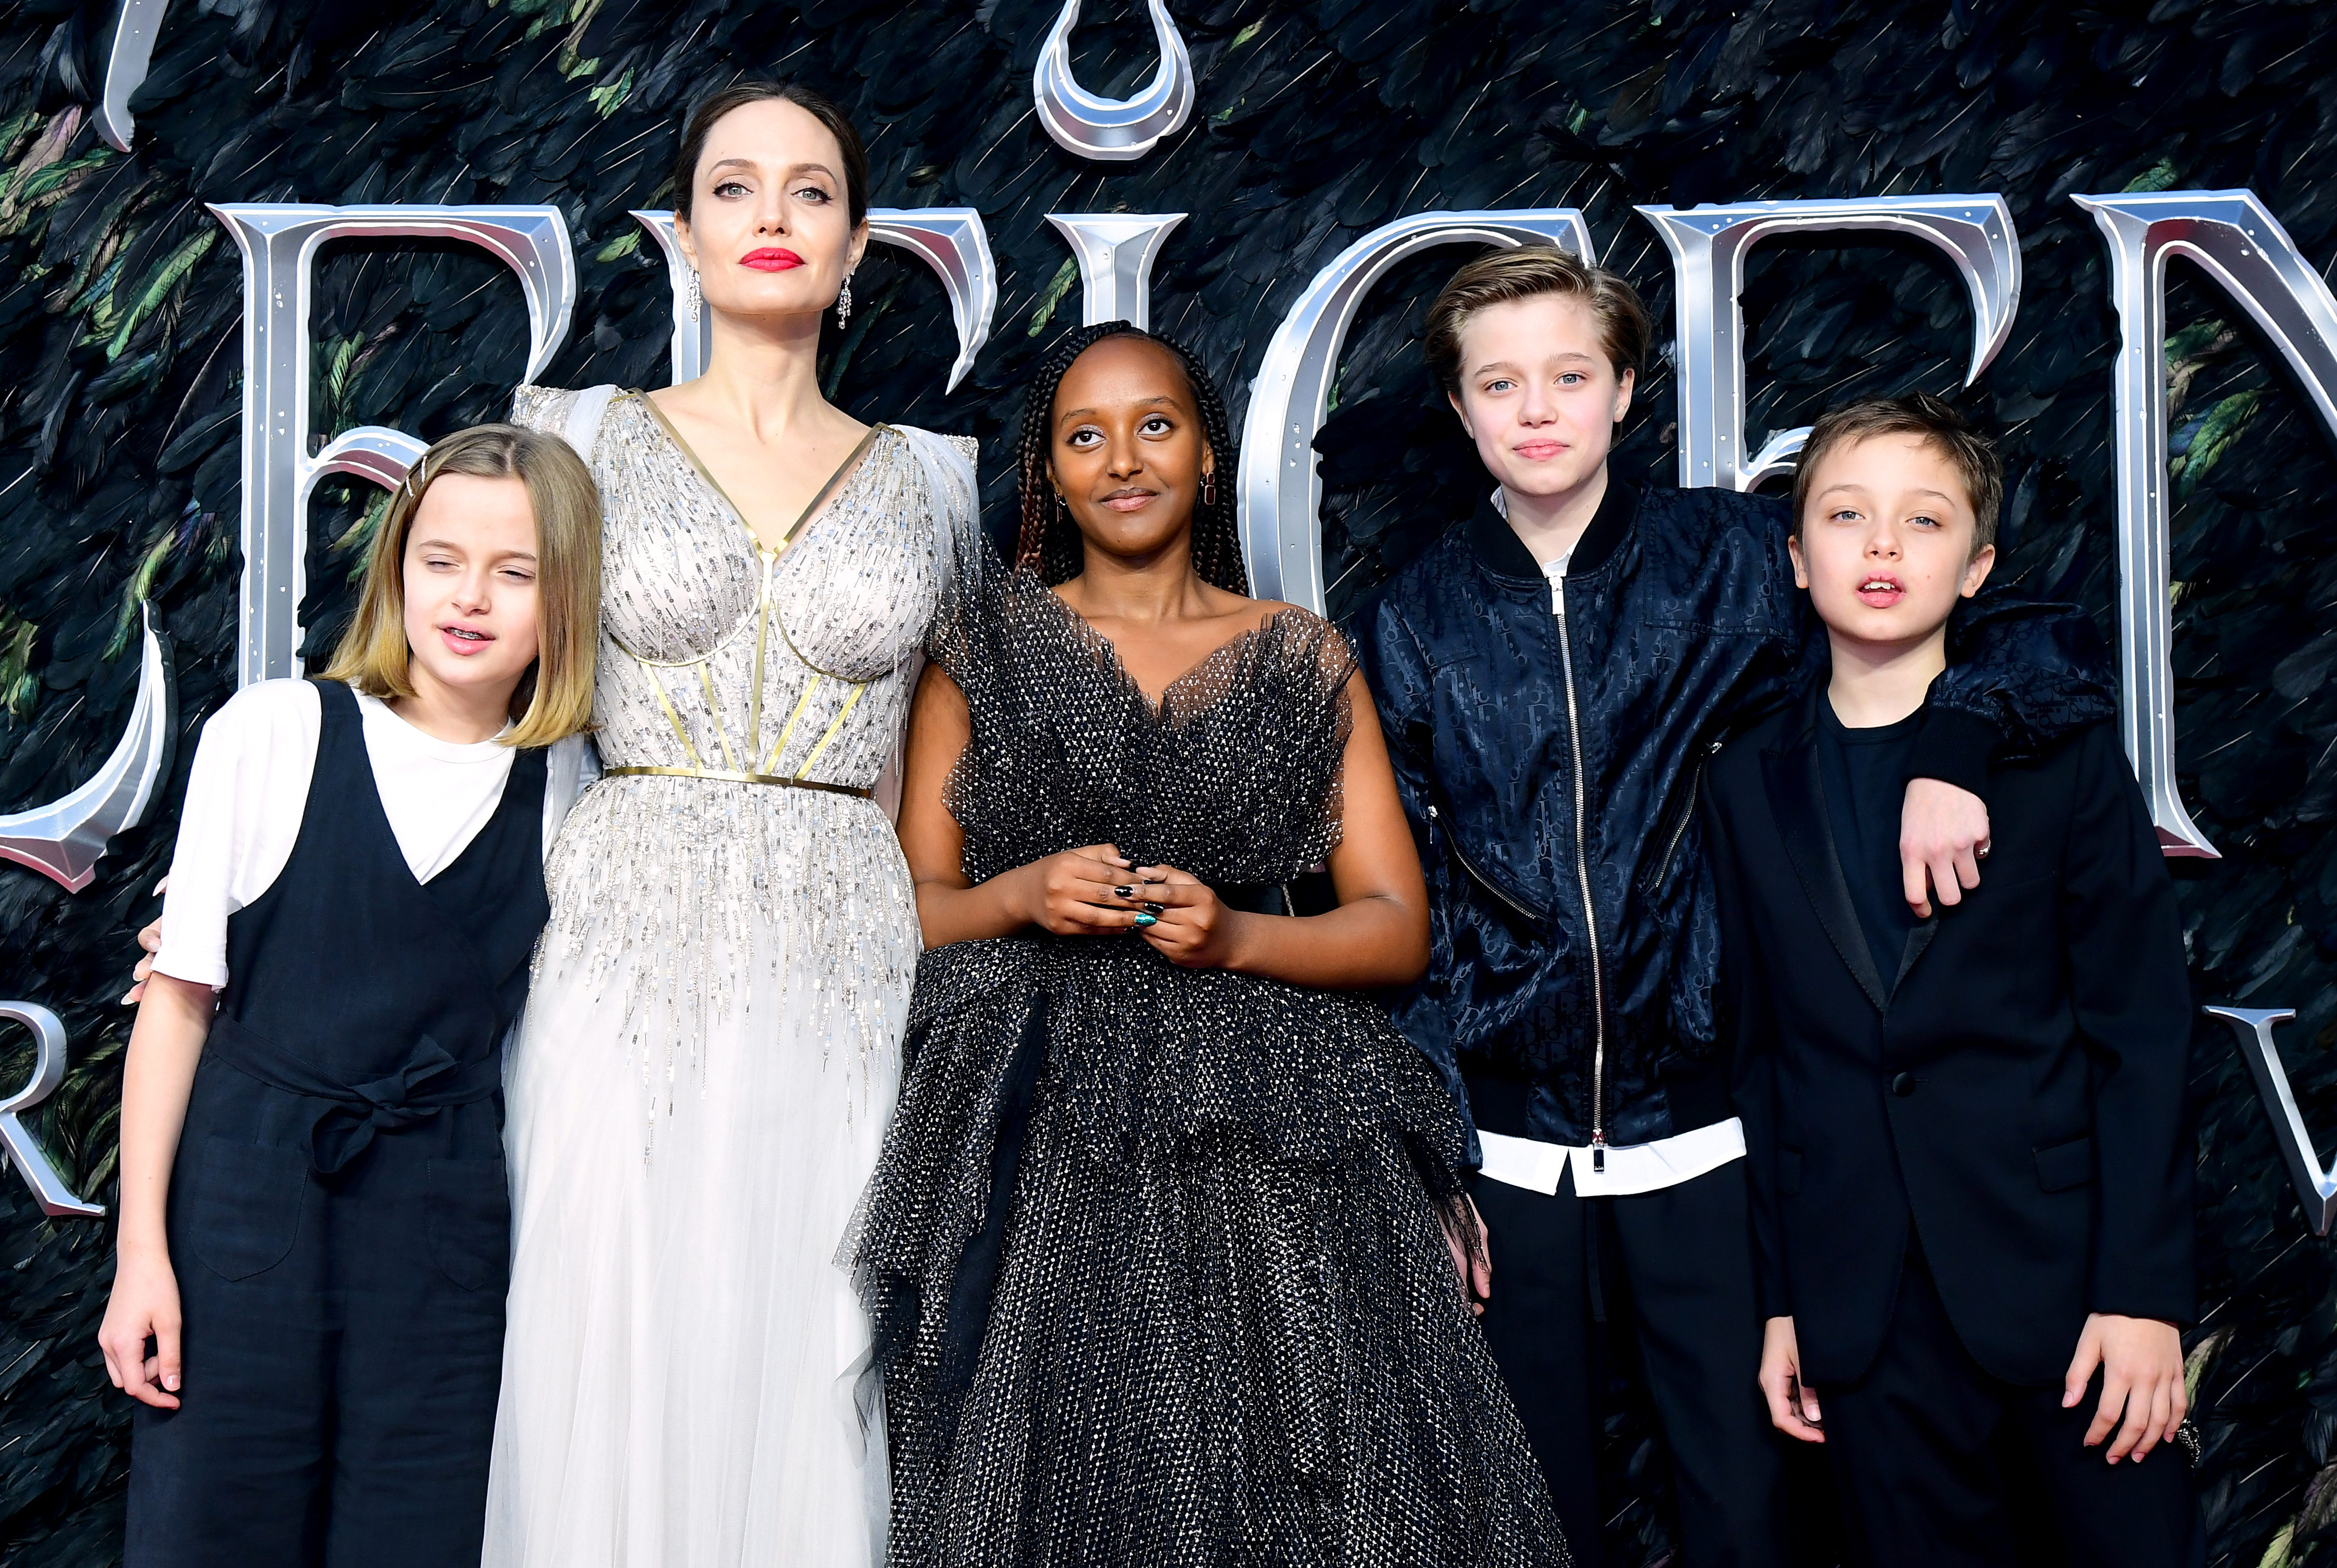 Angelina Jolie with Vivienne, Zahara, Shiloh, and Knox Jolie-Pitt during the Maleficent: Mistress of Evil European Premiere held at Imax Waterloo in London on October 9, 2019 | Source: Getty Images